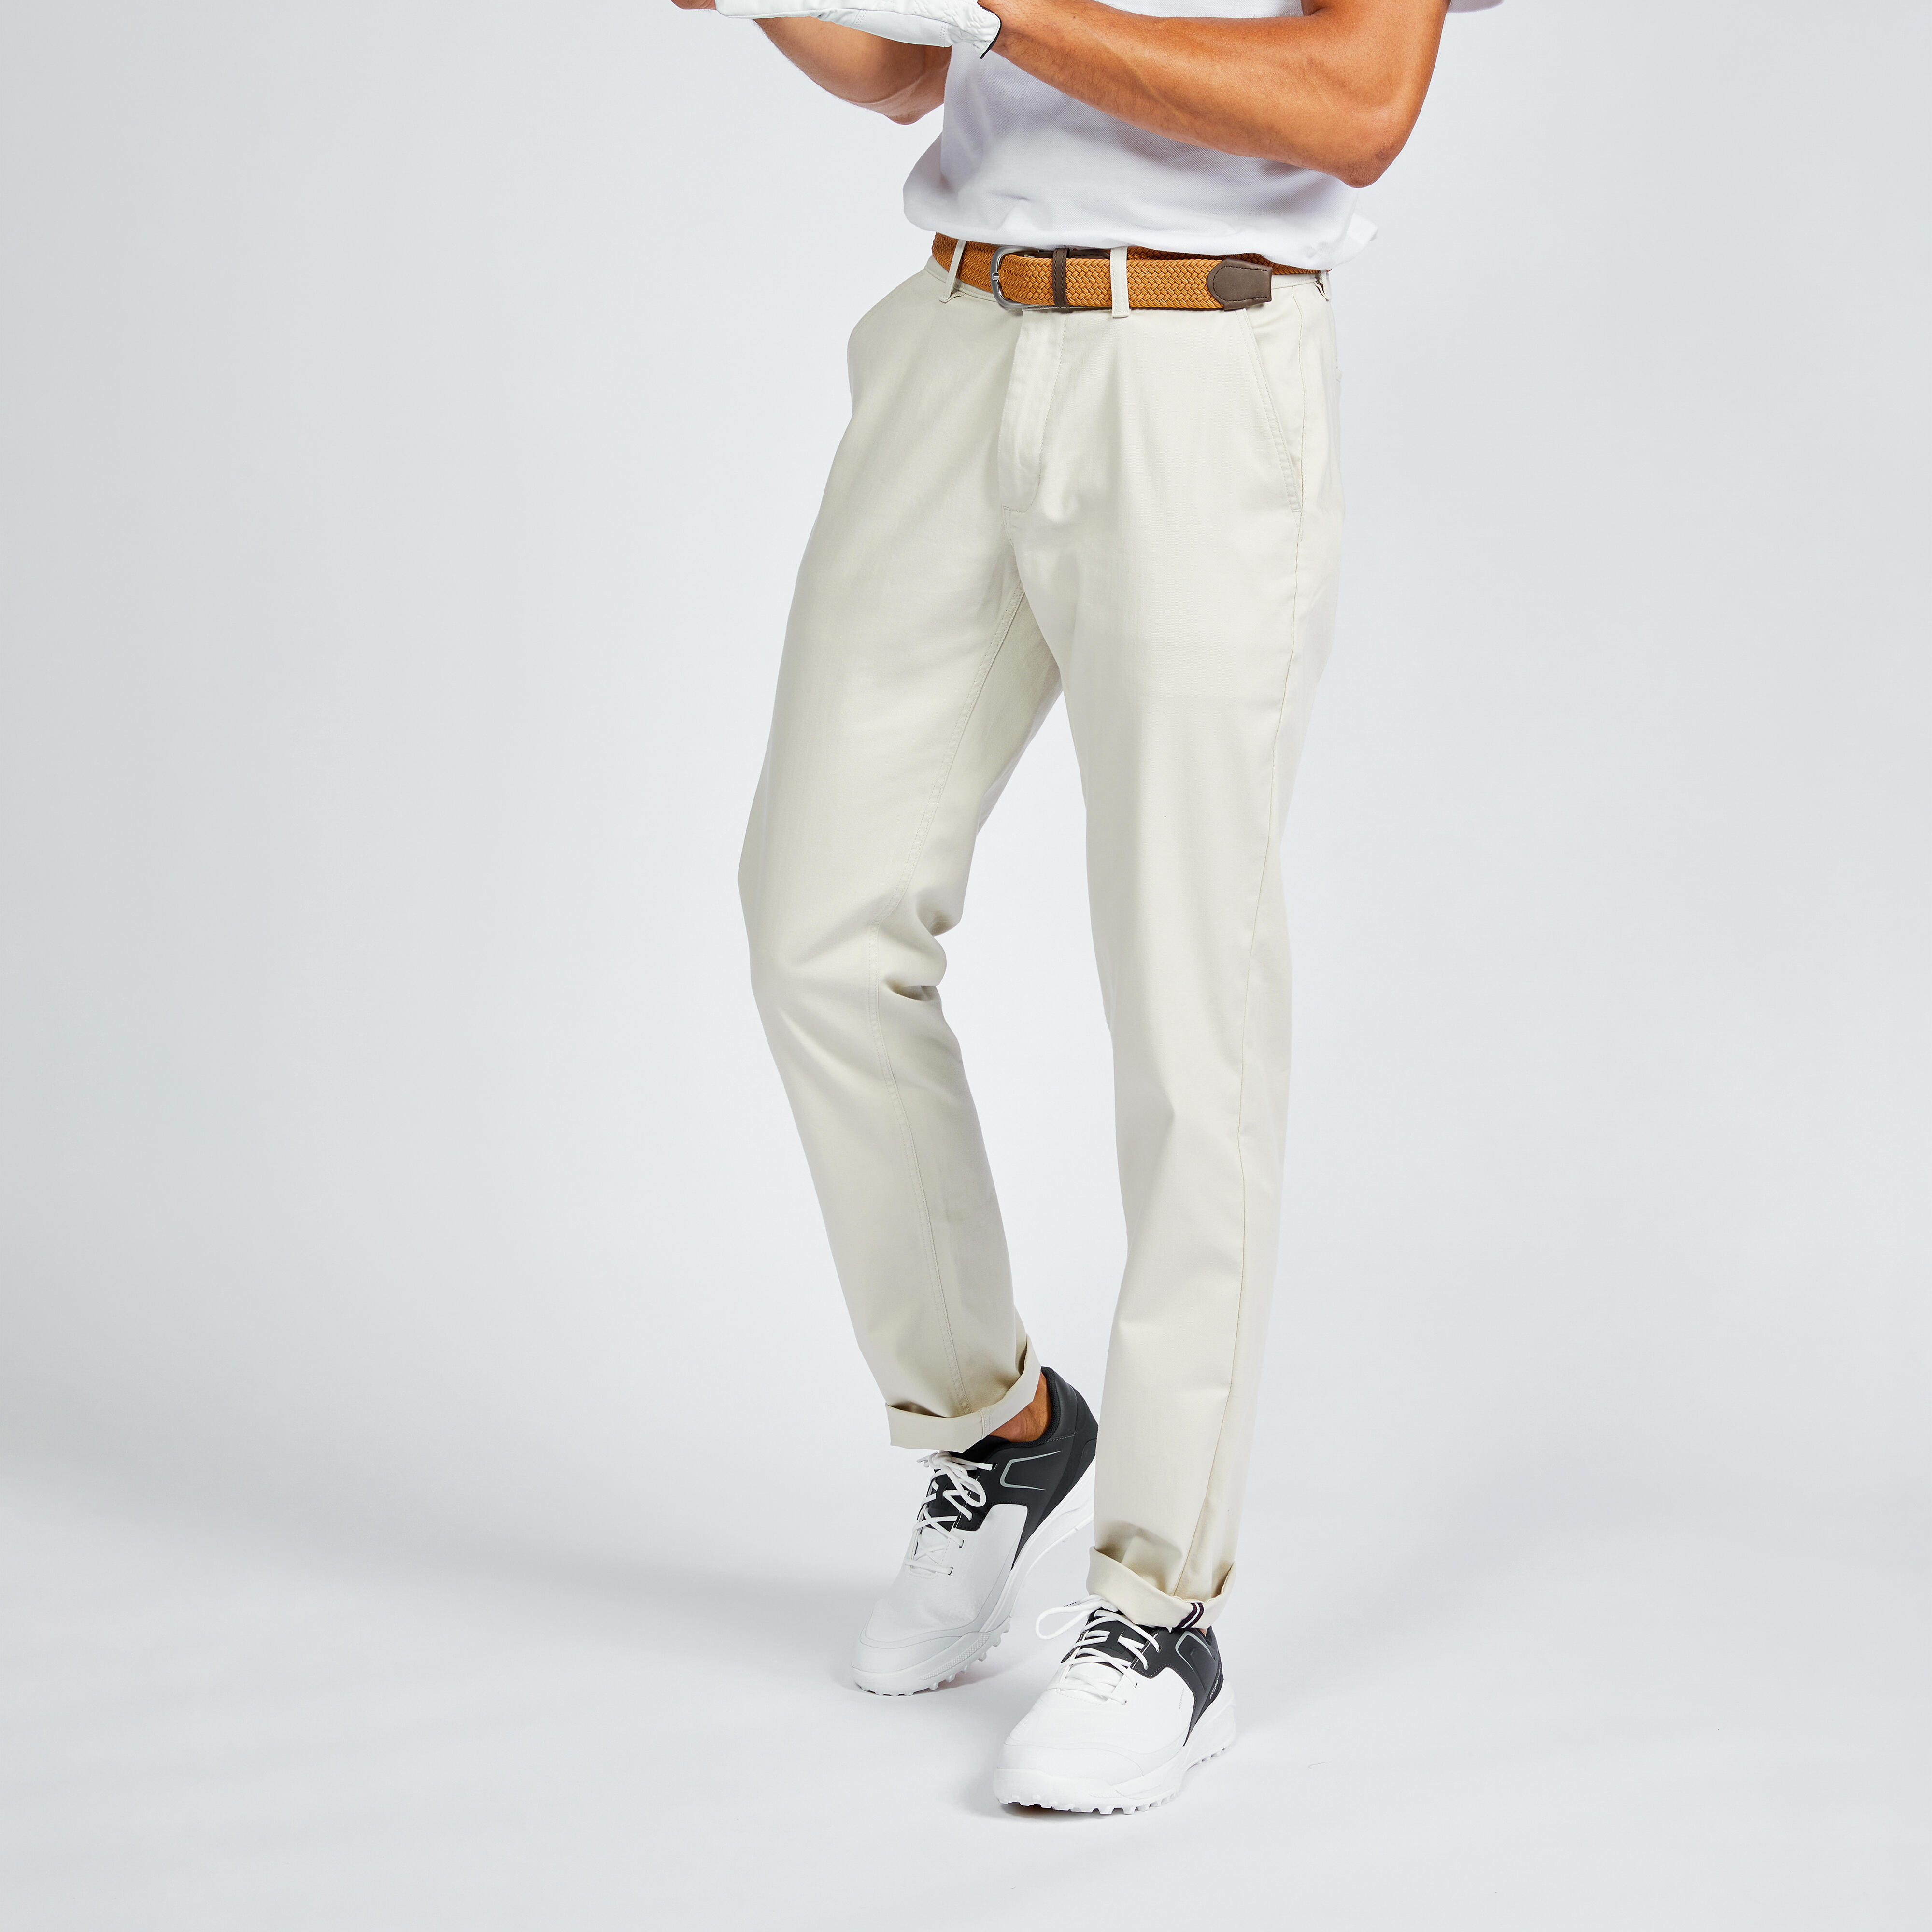 Buy Inesis 8562127 Mens Beige colour Slim fit Golf Trousers UK29 FR38  L33 Online at Low Prices in India  Amazonin